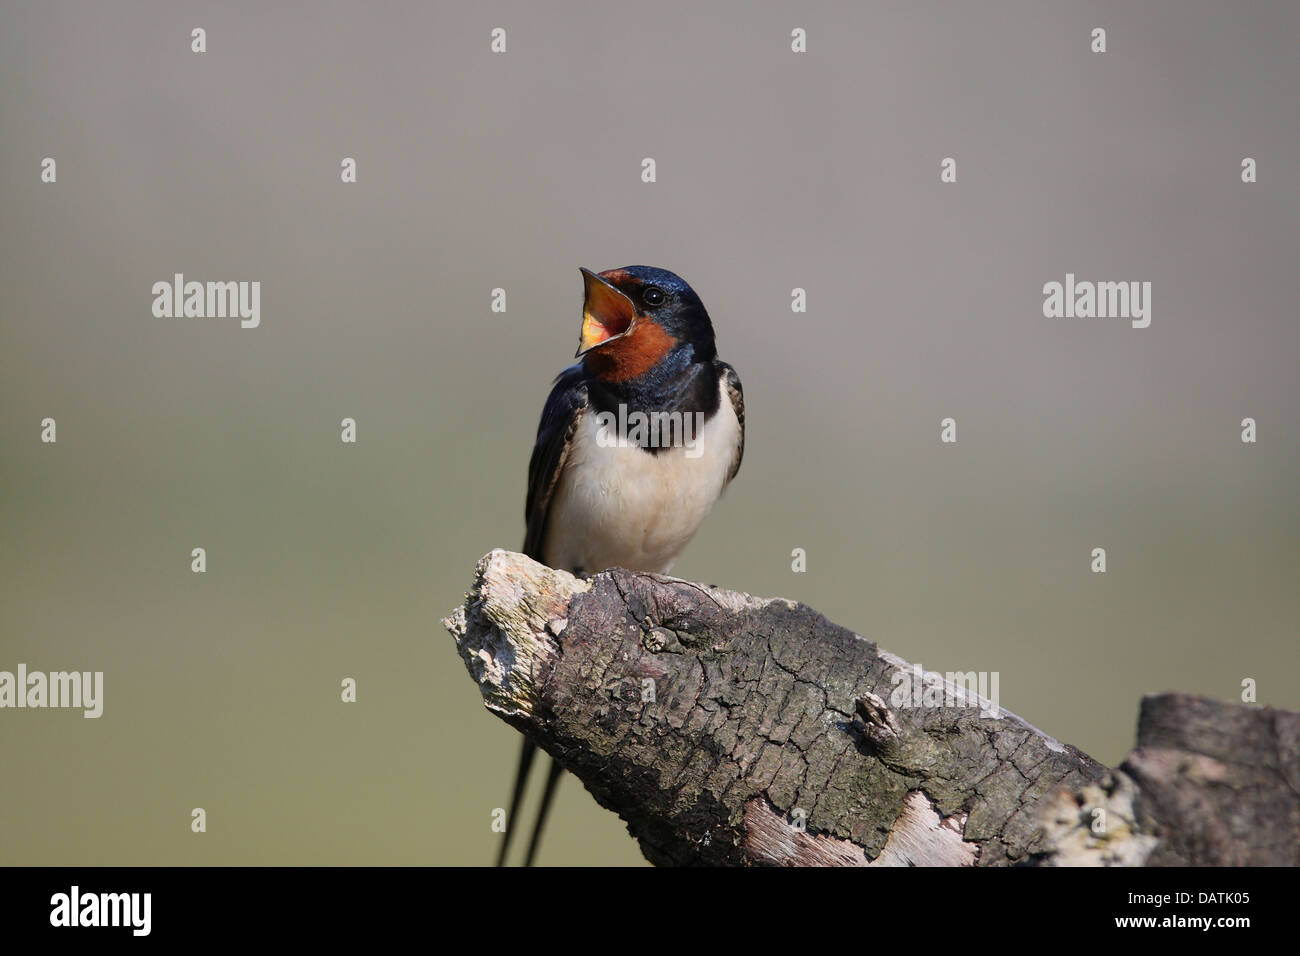 Swallow perched on dead branch showing barbs in the roof of its mouth Stock Photo